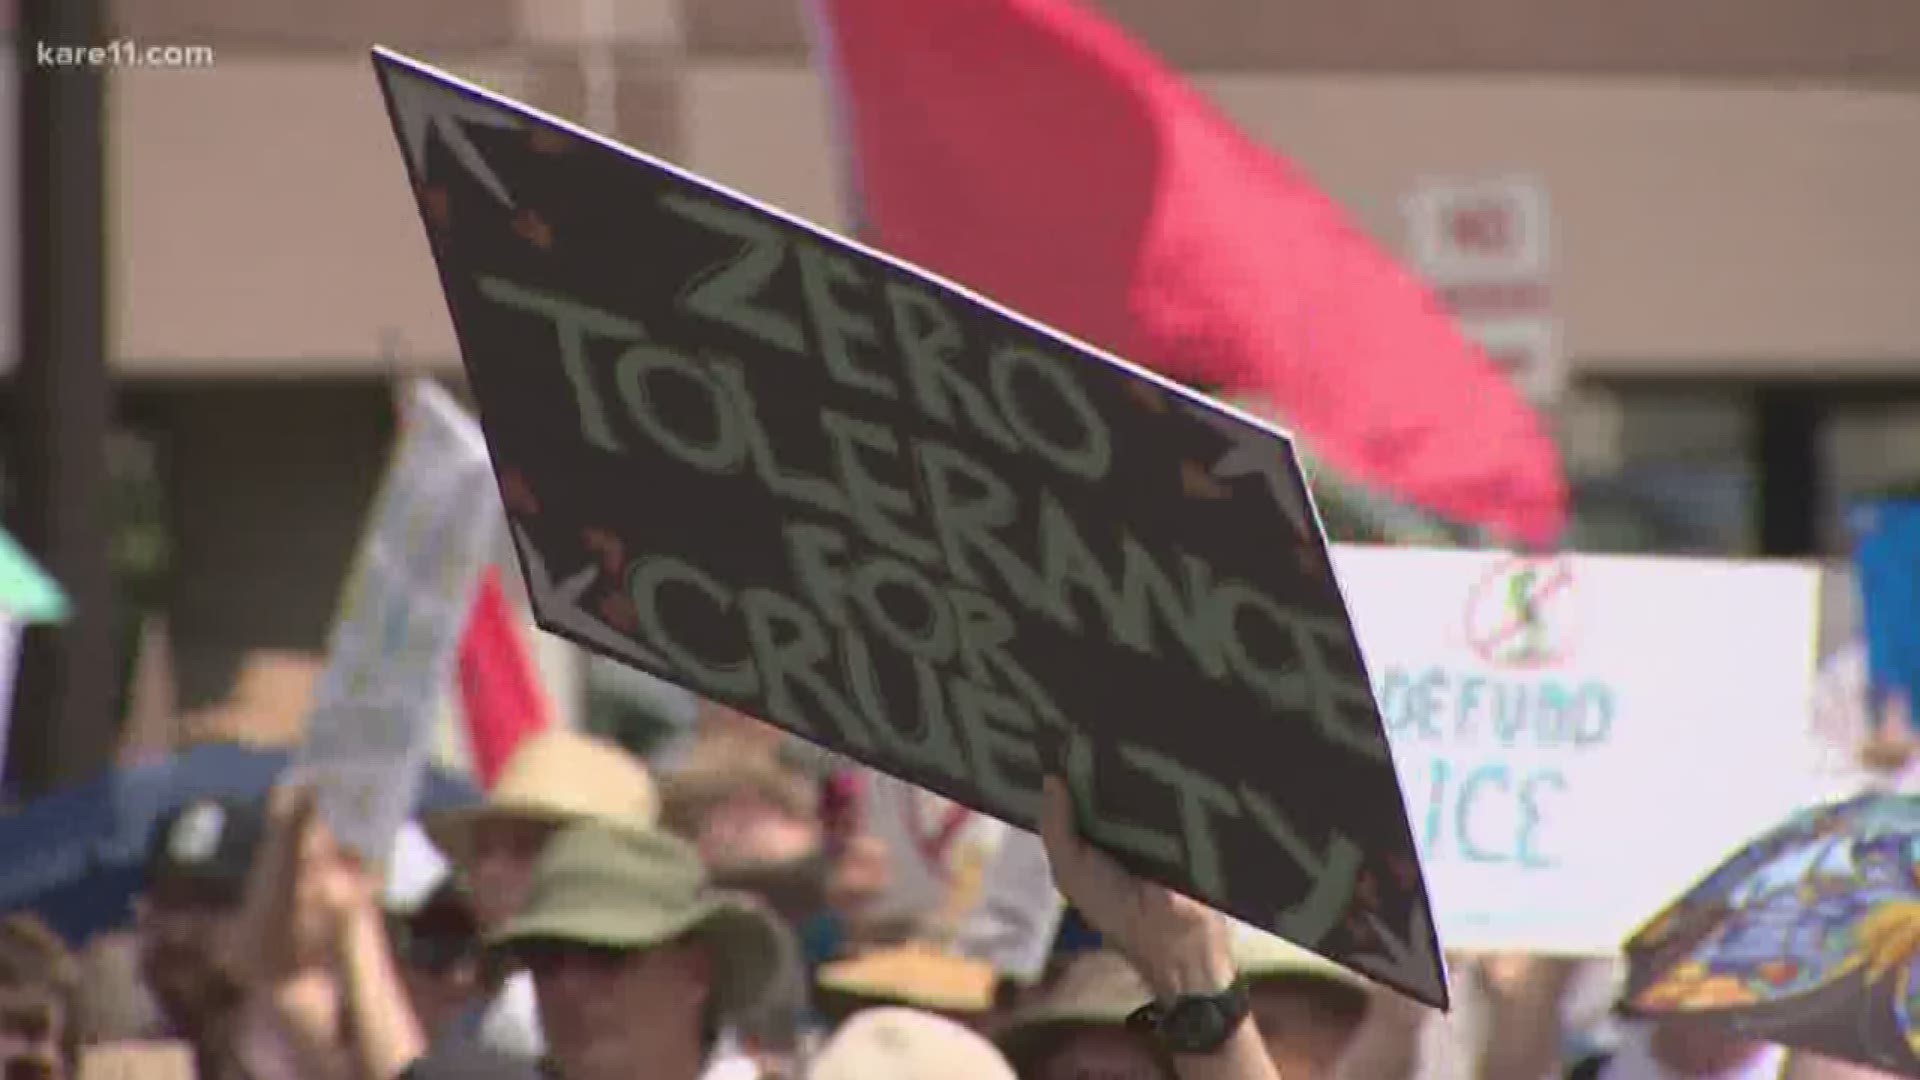 June 30 protesters march in Minneapolis against separating families at the border.